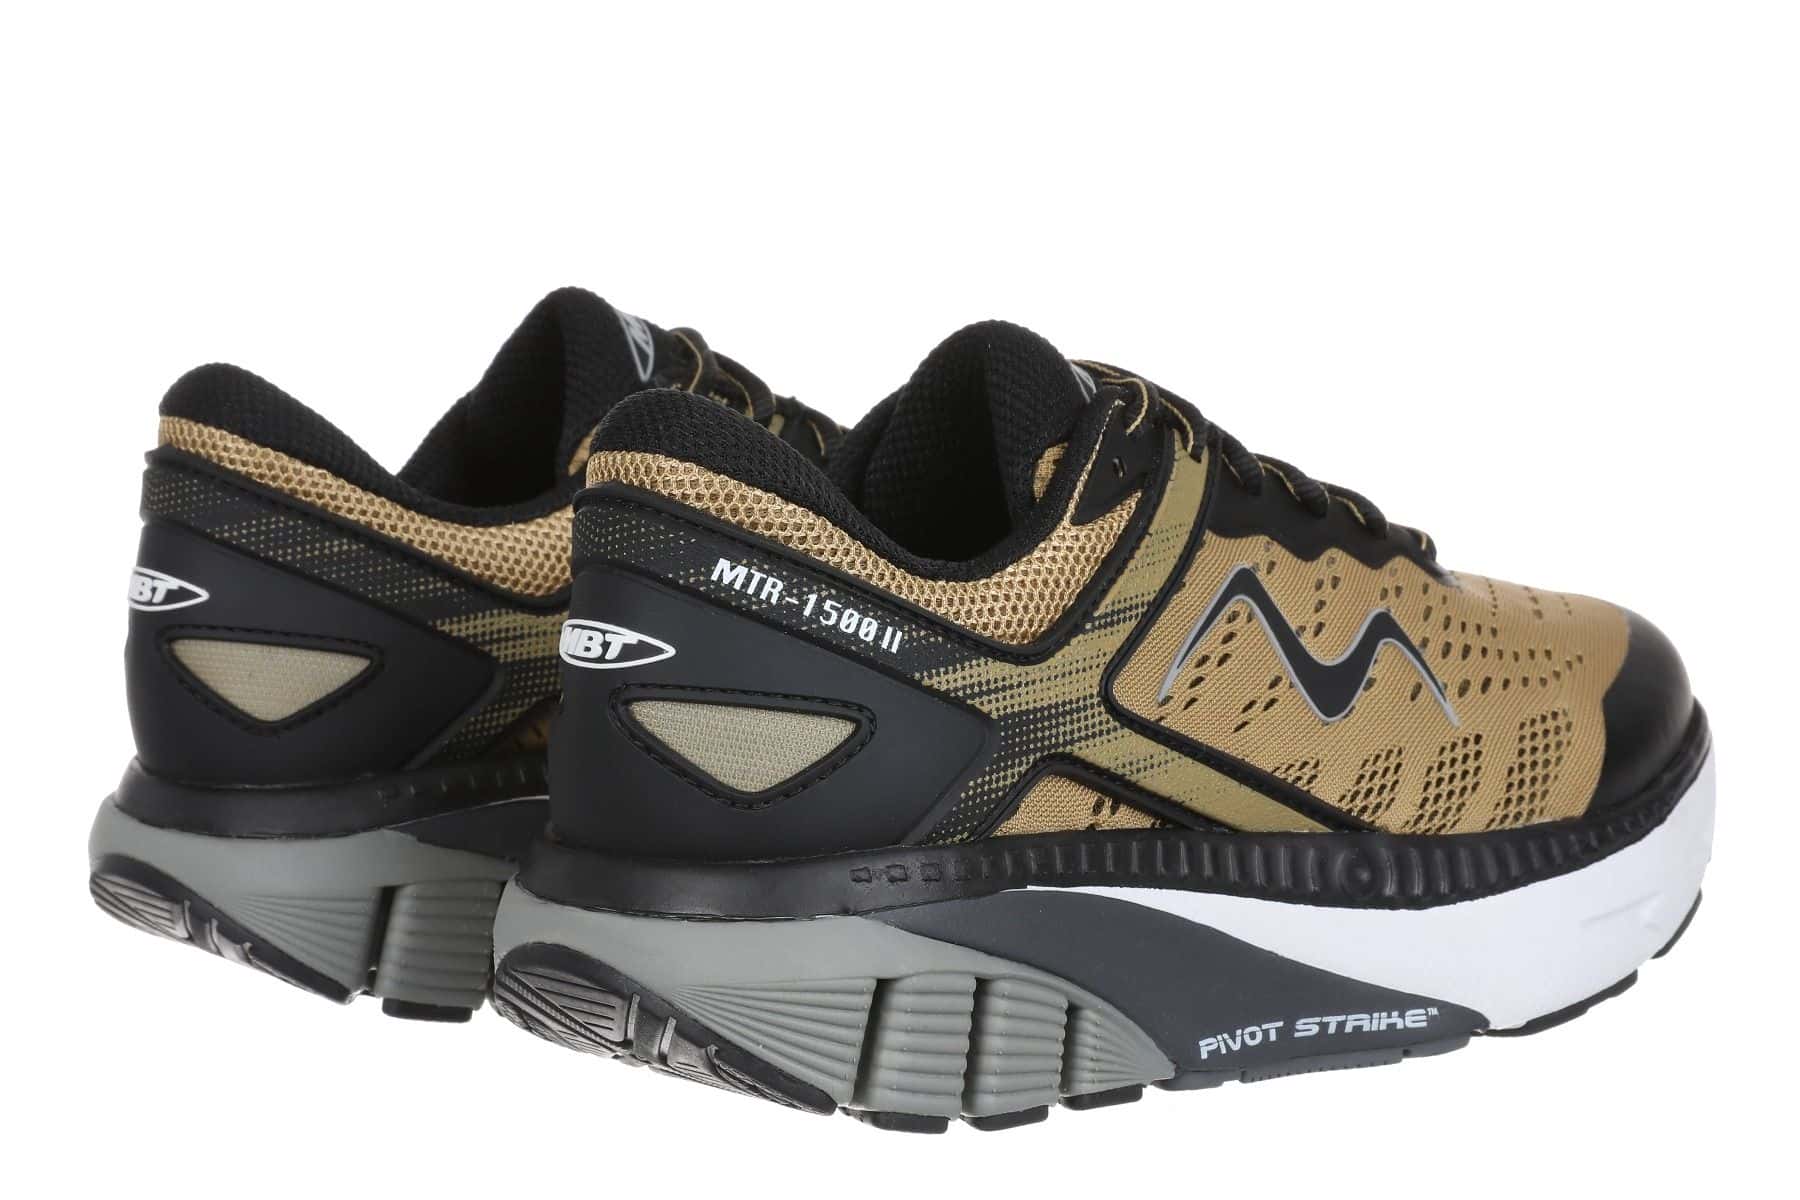 MBT MTR-1500 II LACE UP WOMEN´S RUNNING SHOES PRAIRIE SAND